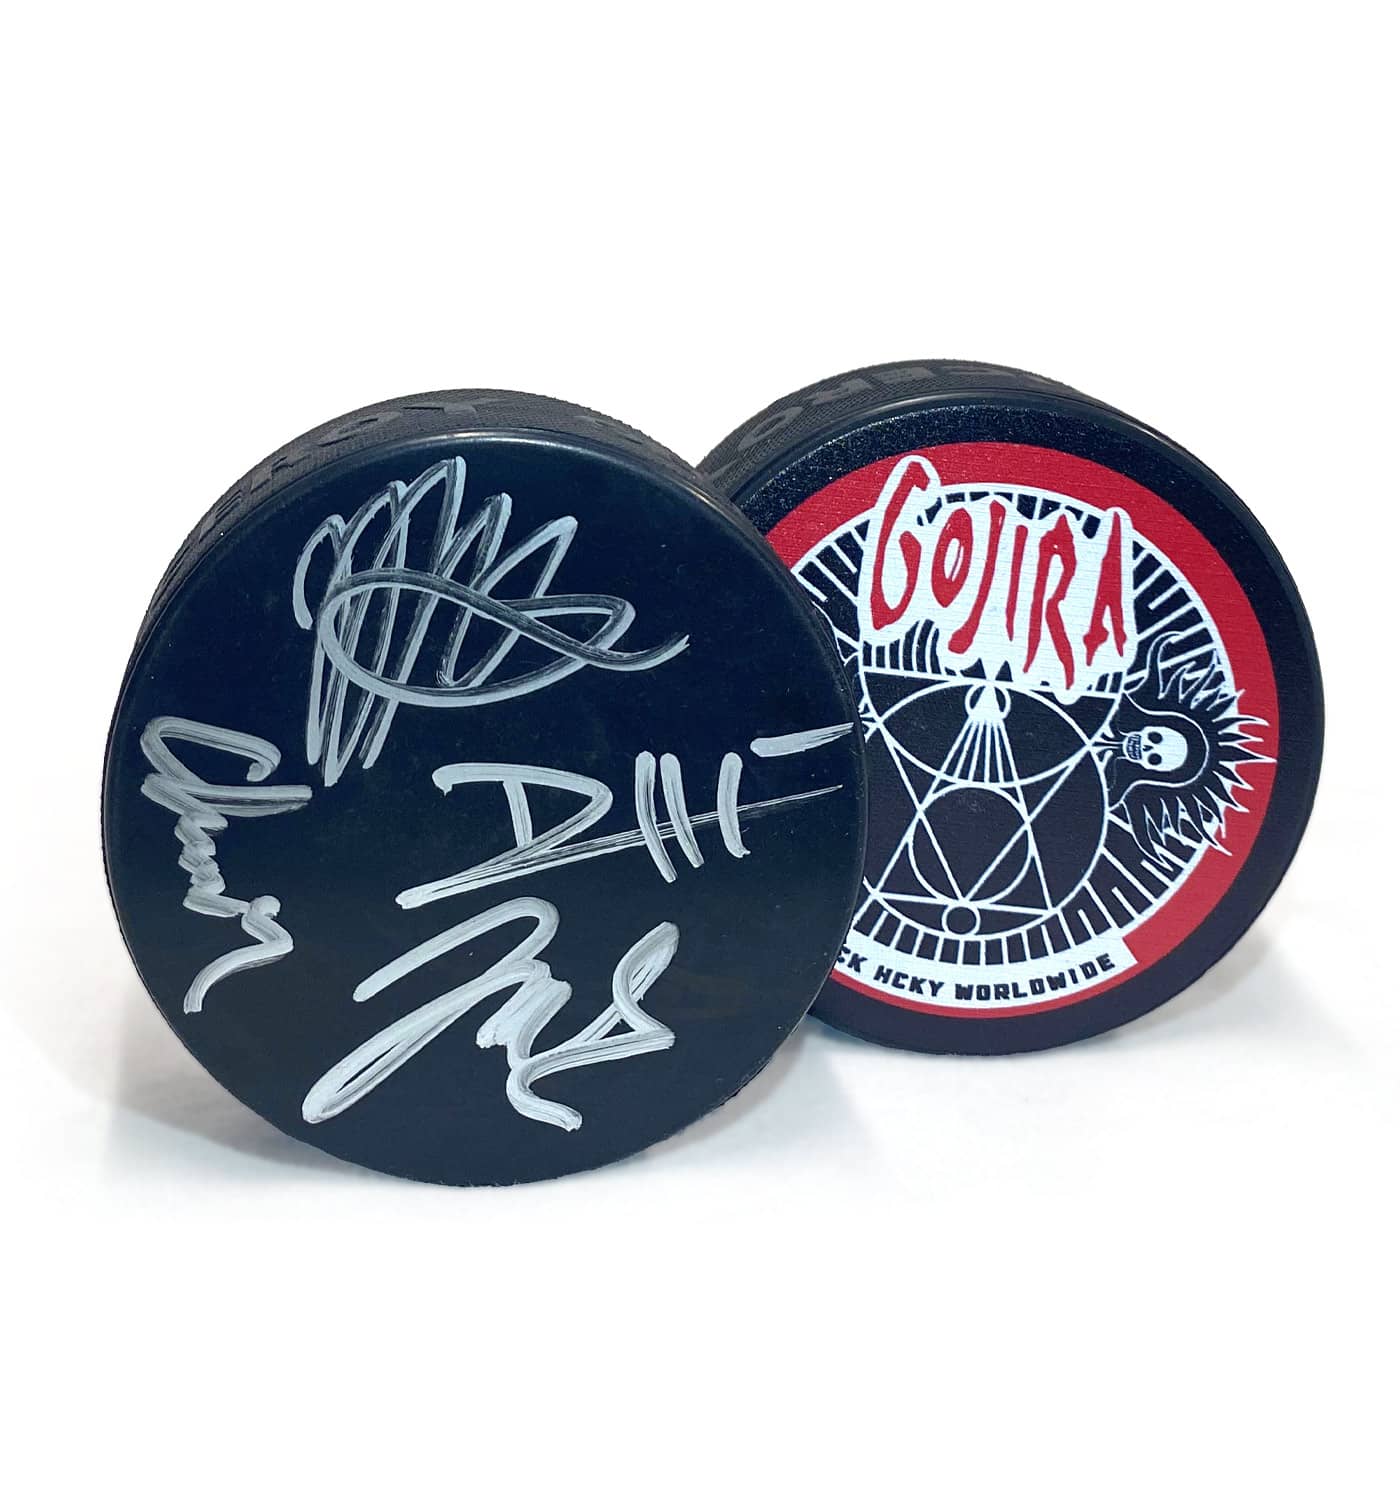 GOJIRA 'THE SHOOTING STAR' limited edition hockey puck